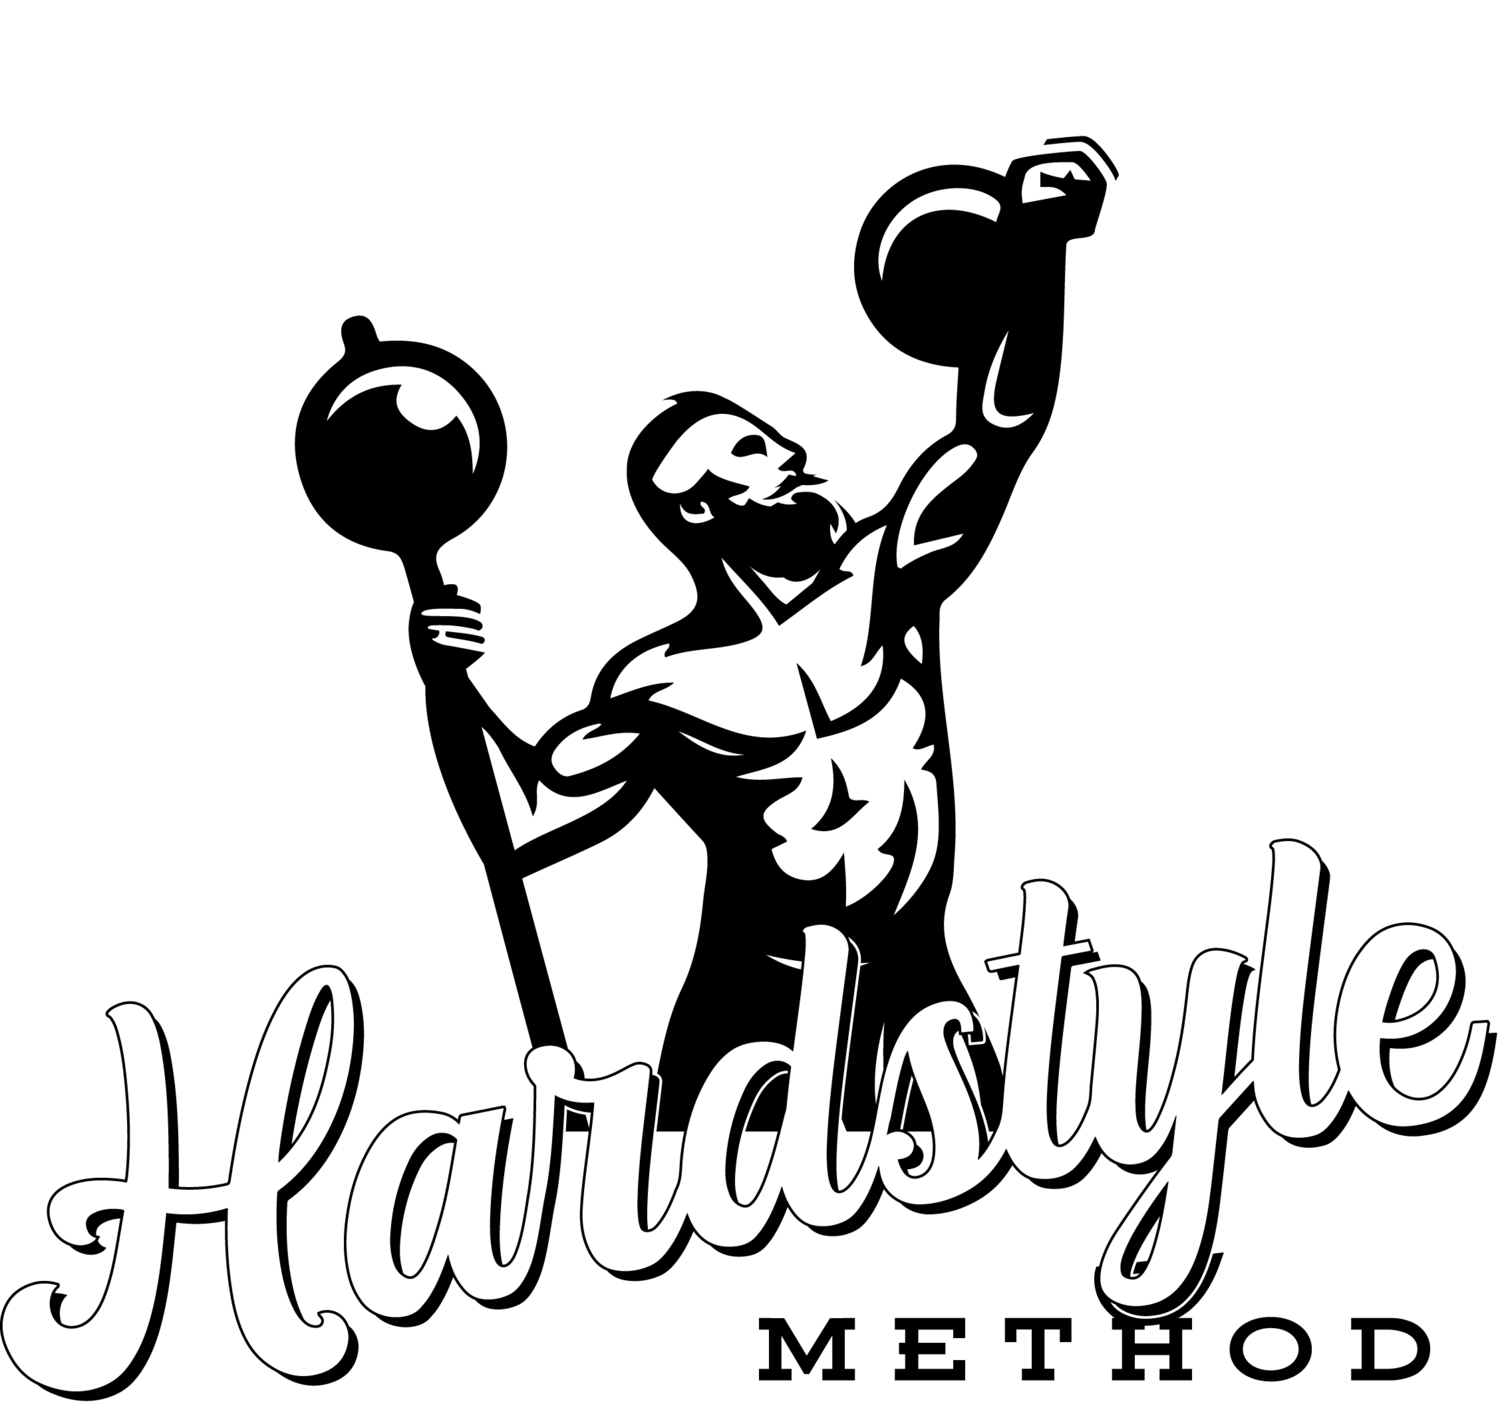 Hardstyle Method - The Kettlebell Experts